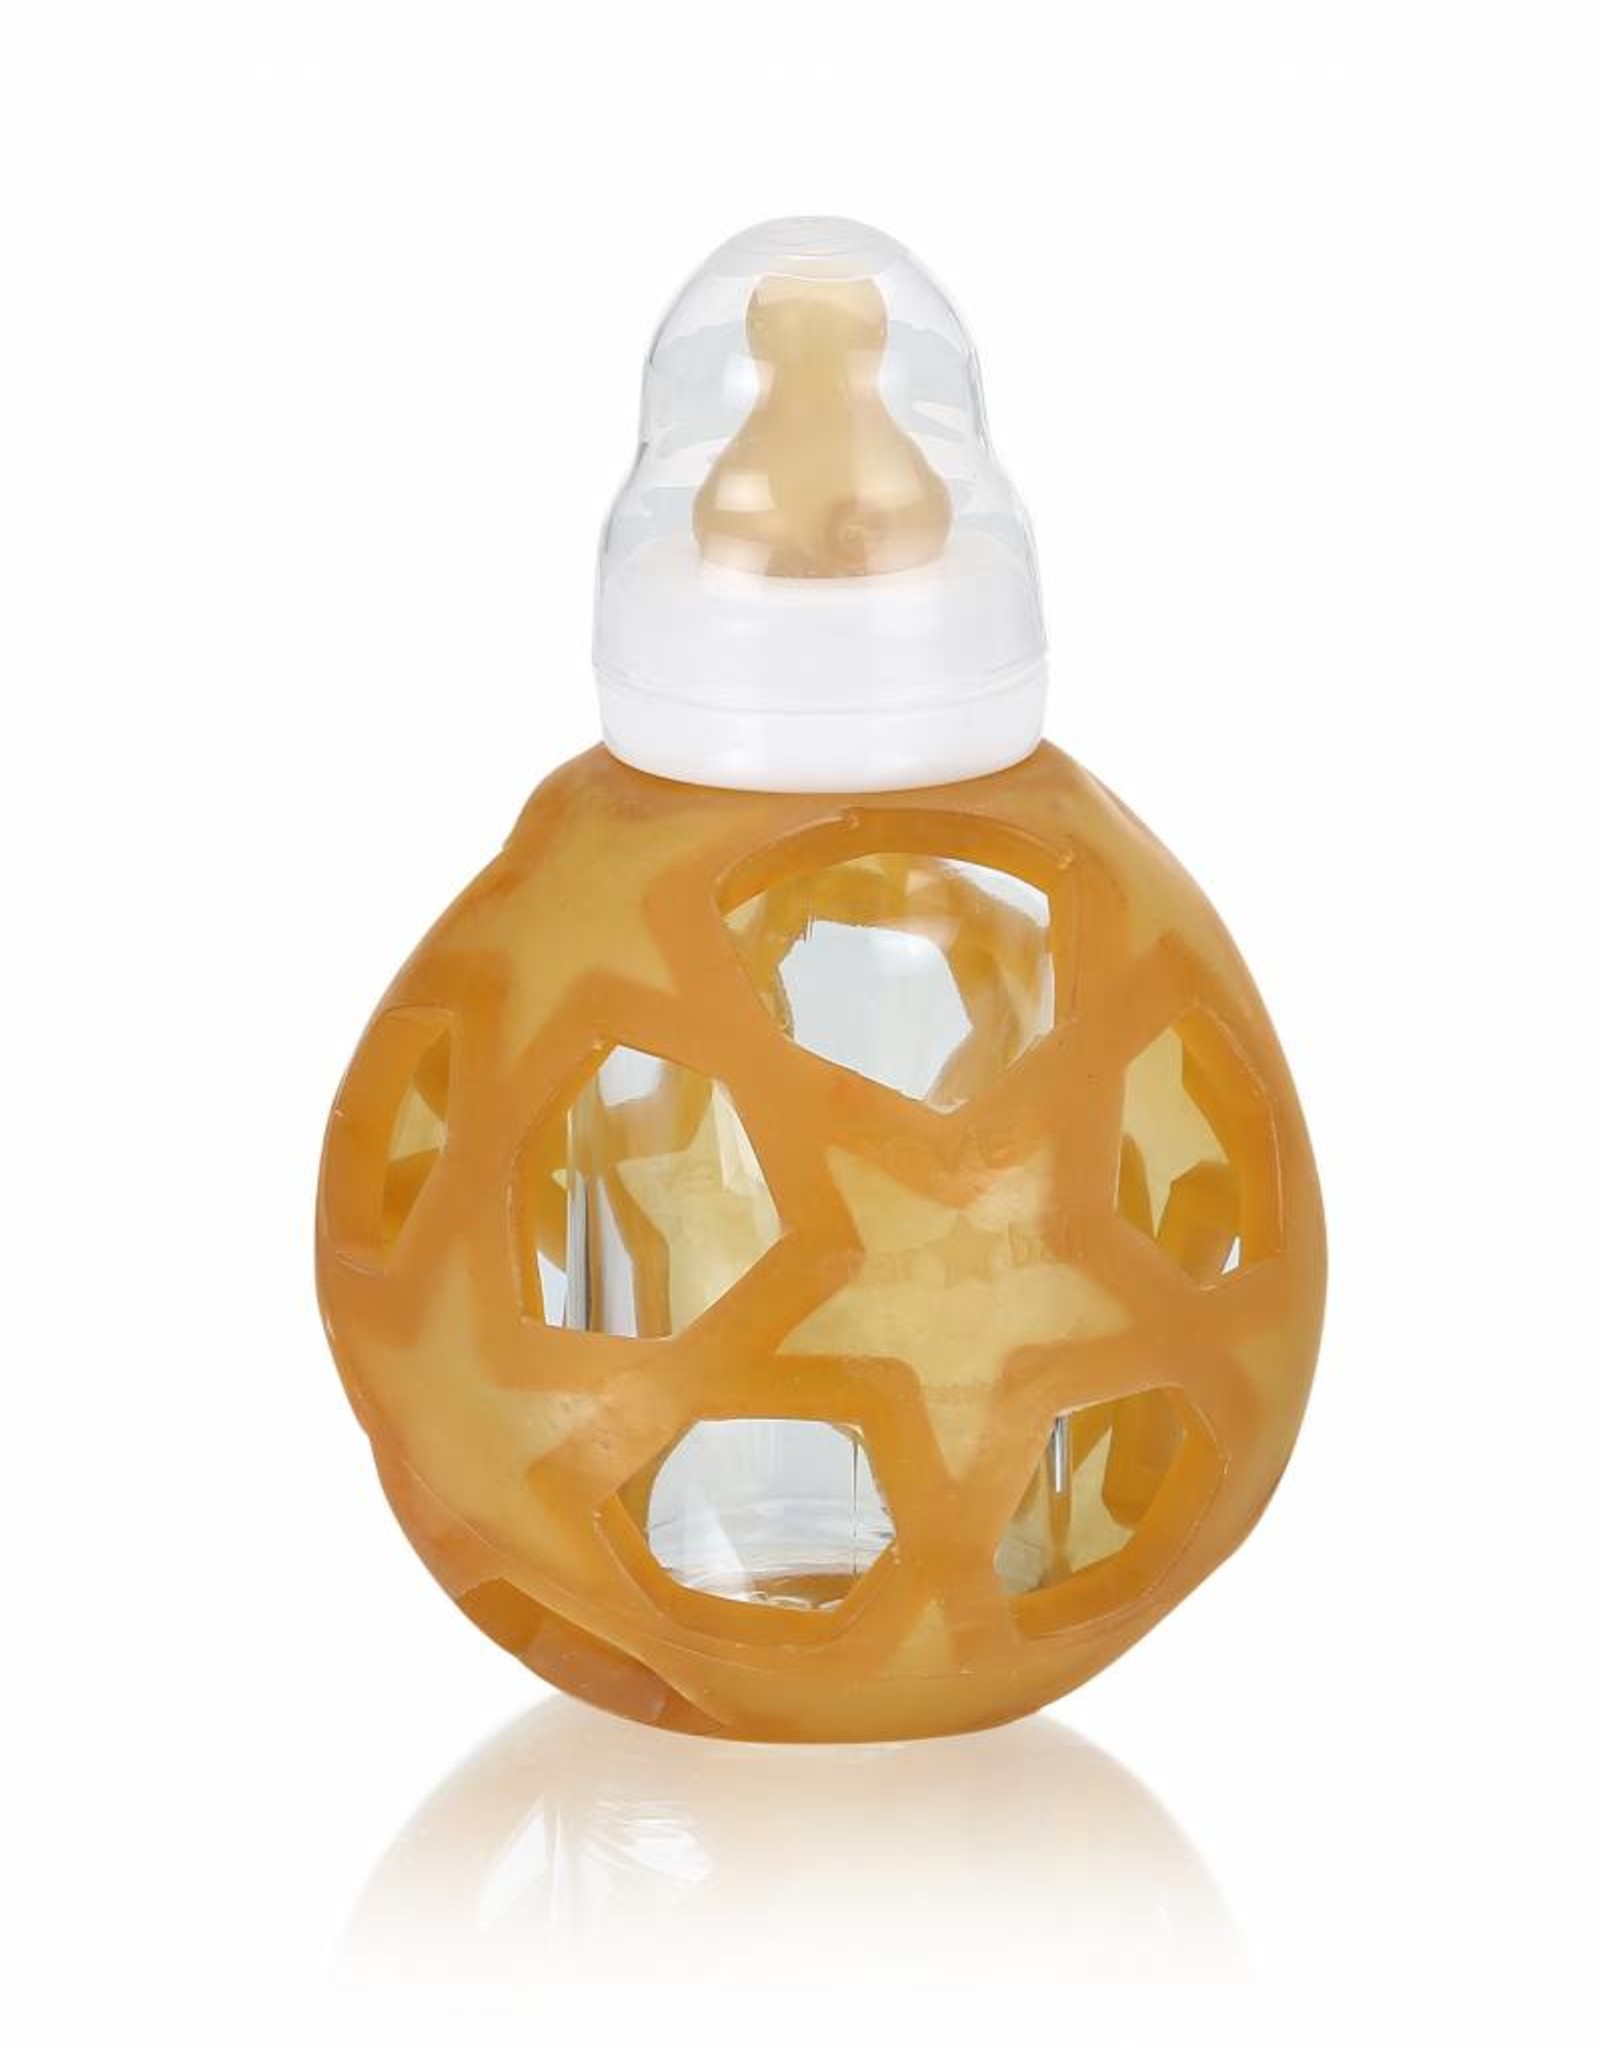 Eco-Friendly BPA-Free & FDA approved Blue HEVEA Upcycled 2in1 Baby Glass Bottle with Star Ball Cover made from 100% Upcycled Natural Rubber Plant Based Plastic-Free 